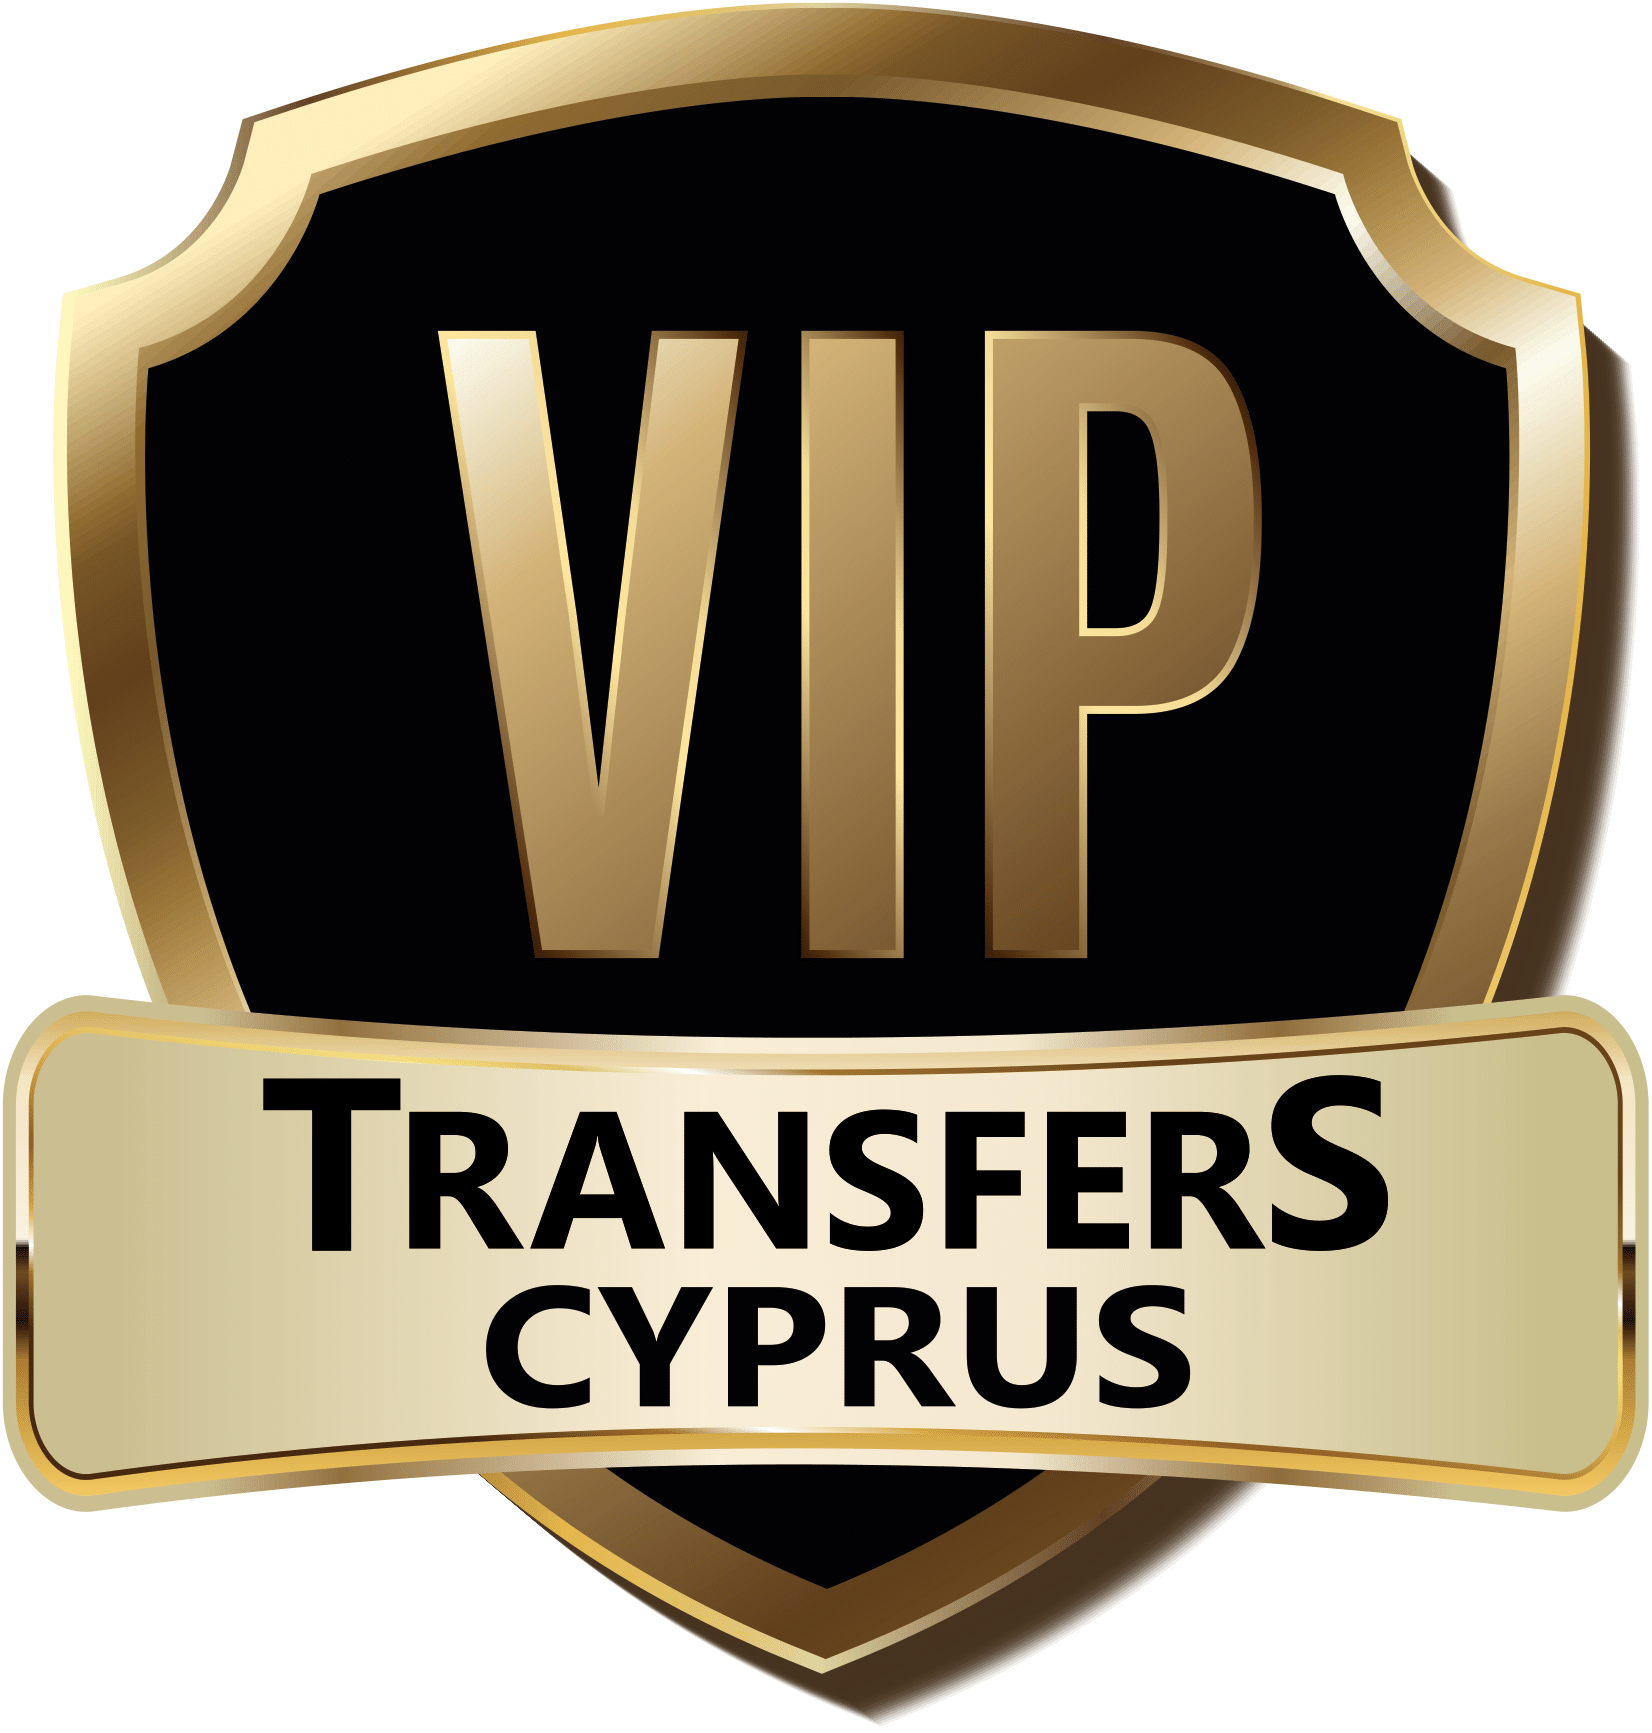 VIP Transfers Cyprus | Coindesk 20 Digital Assets And Cryptocurrencies - VIP Transfers Cyprus